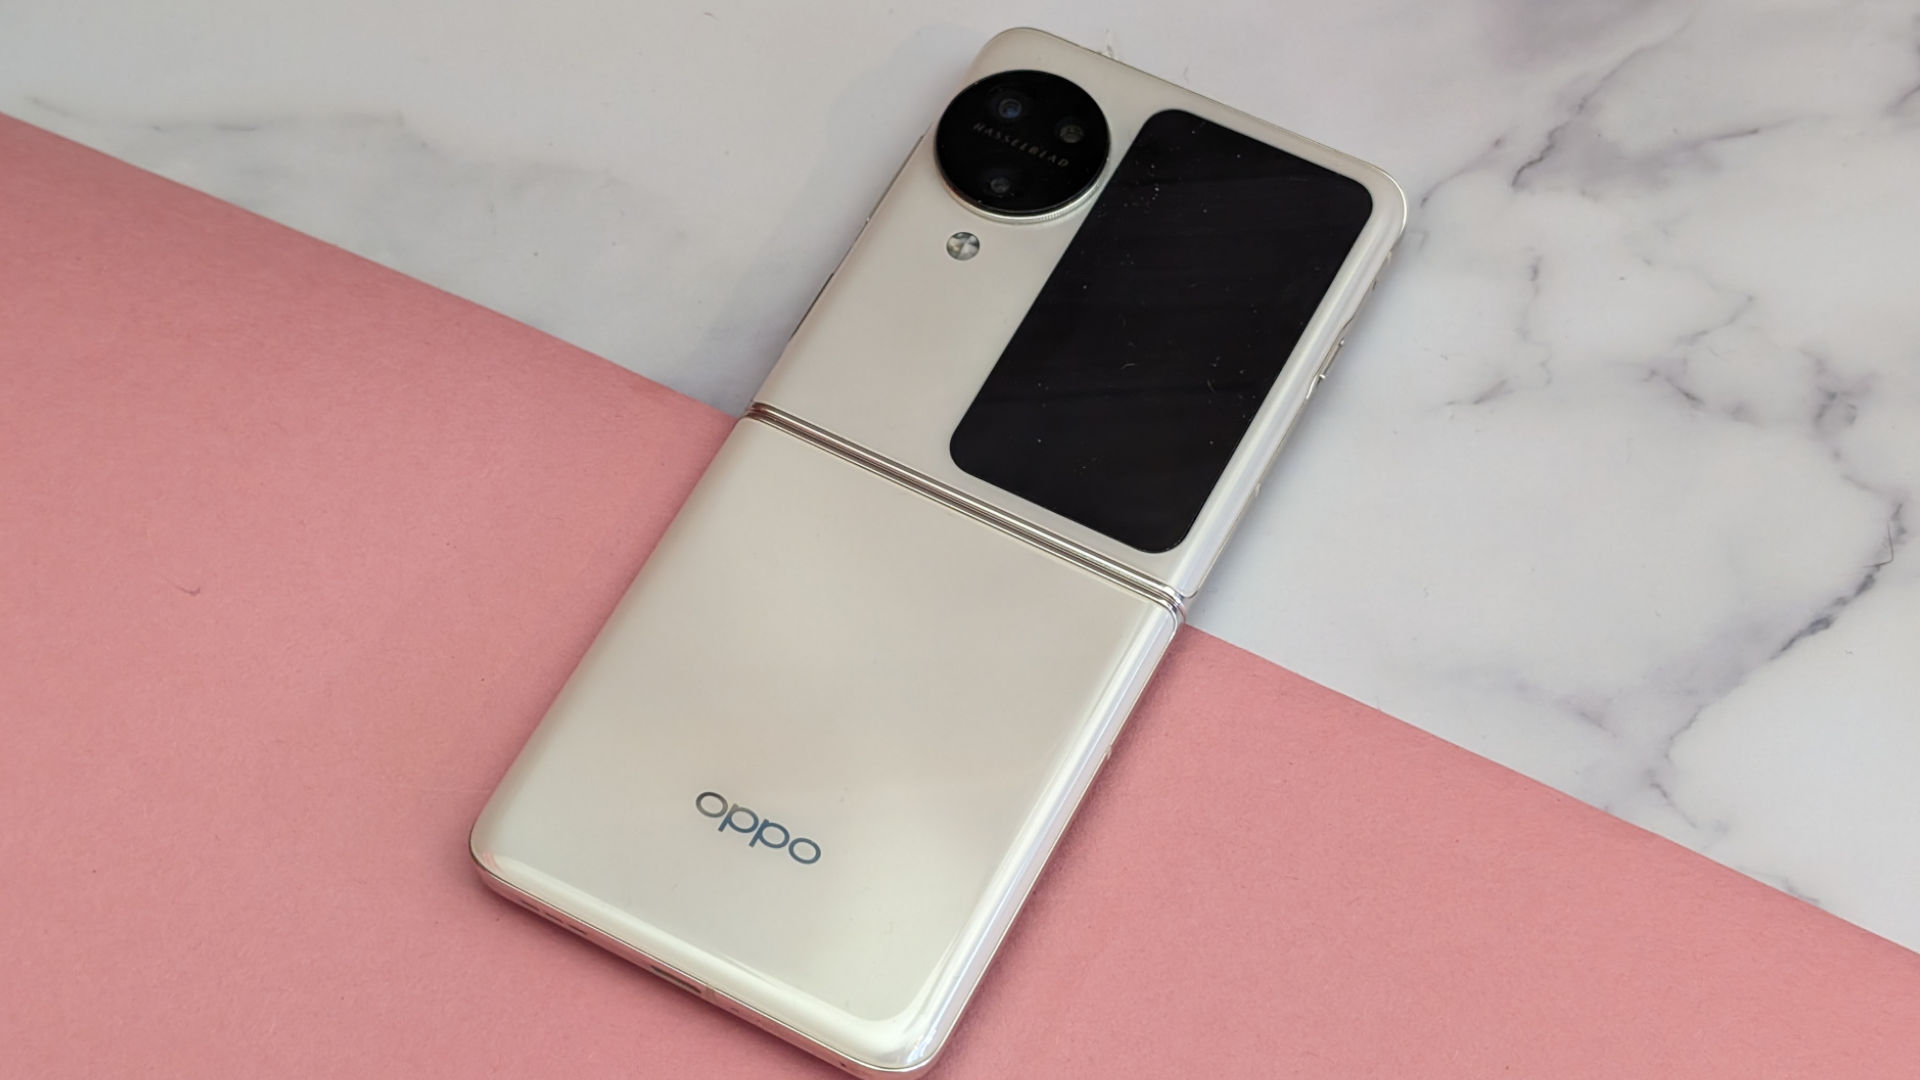 Find N3 Flip review: OPPO's 2nd-gen clamshell-style phone packs a surprise